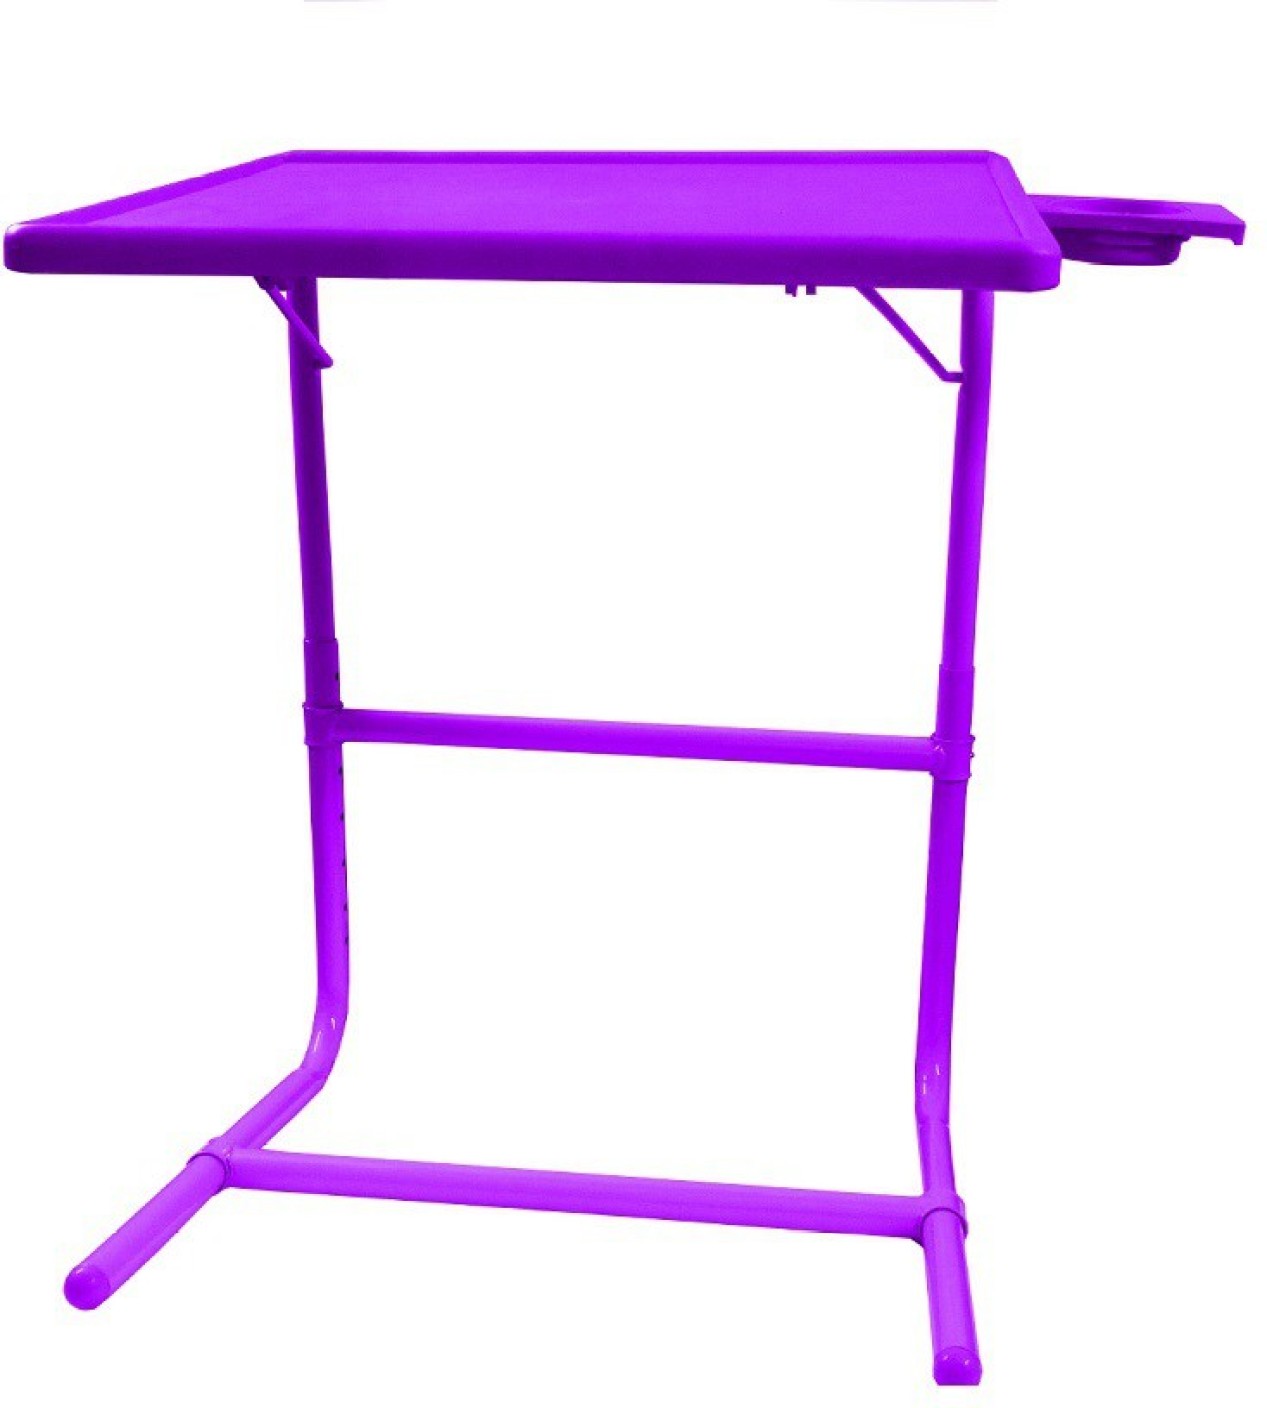 Tablemate Purple Platinum Tablemate With Double Foot Rest 